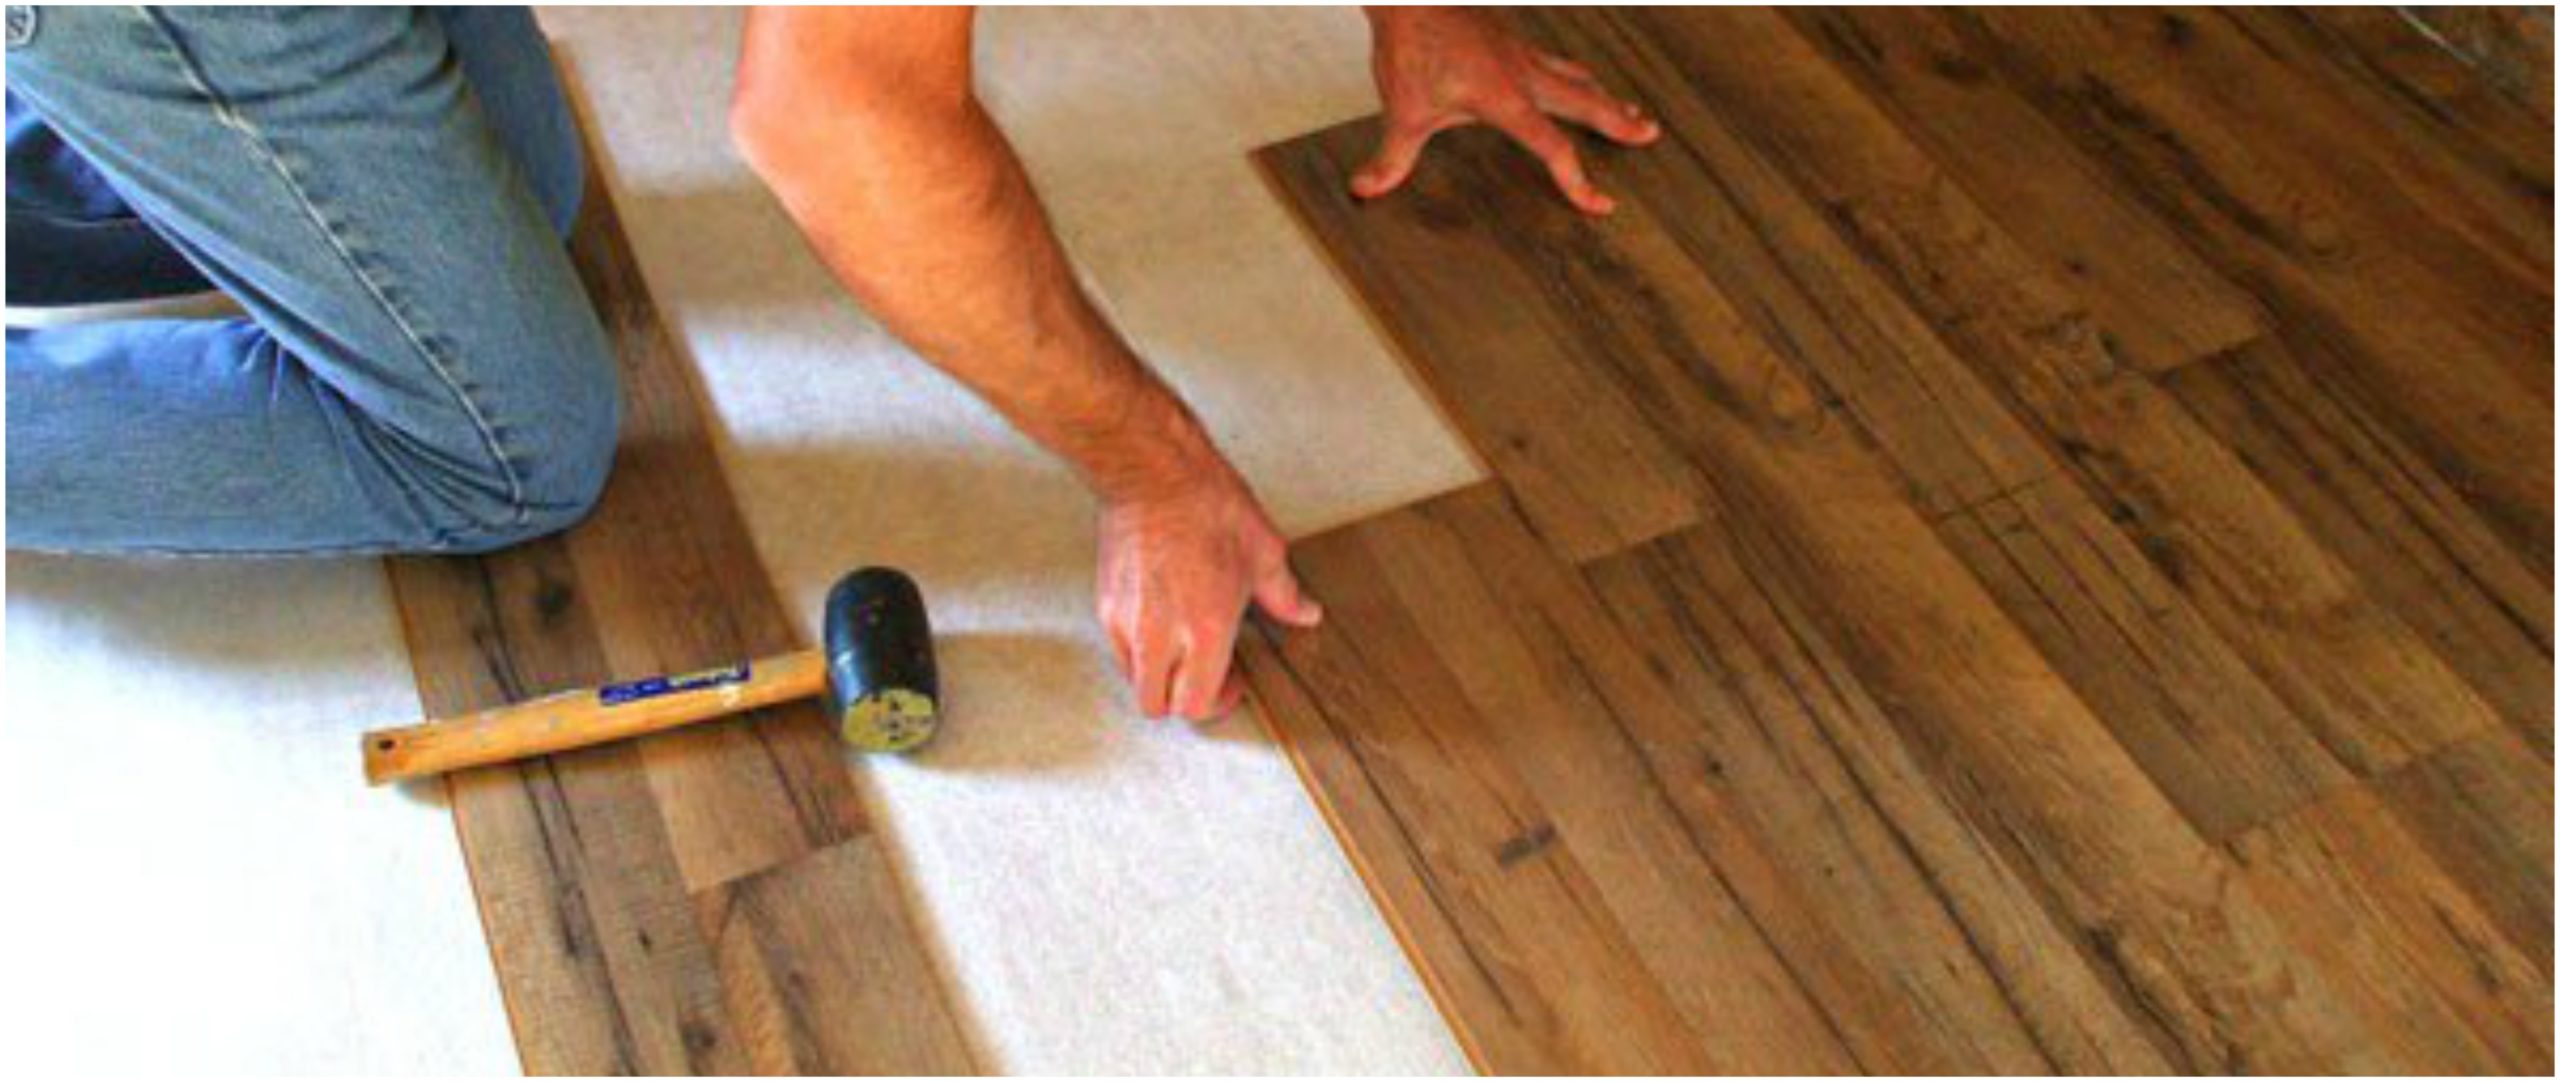 Six Helping Steps To Install Laminate Flooring On Your Own - World ...